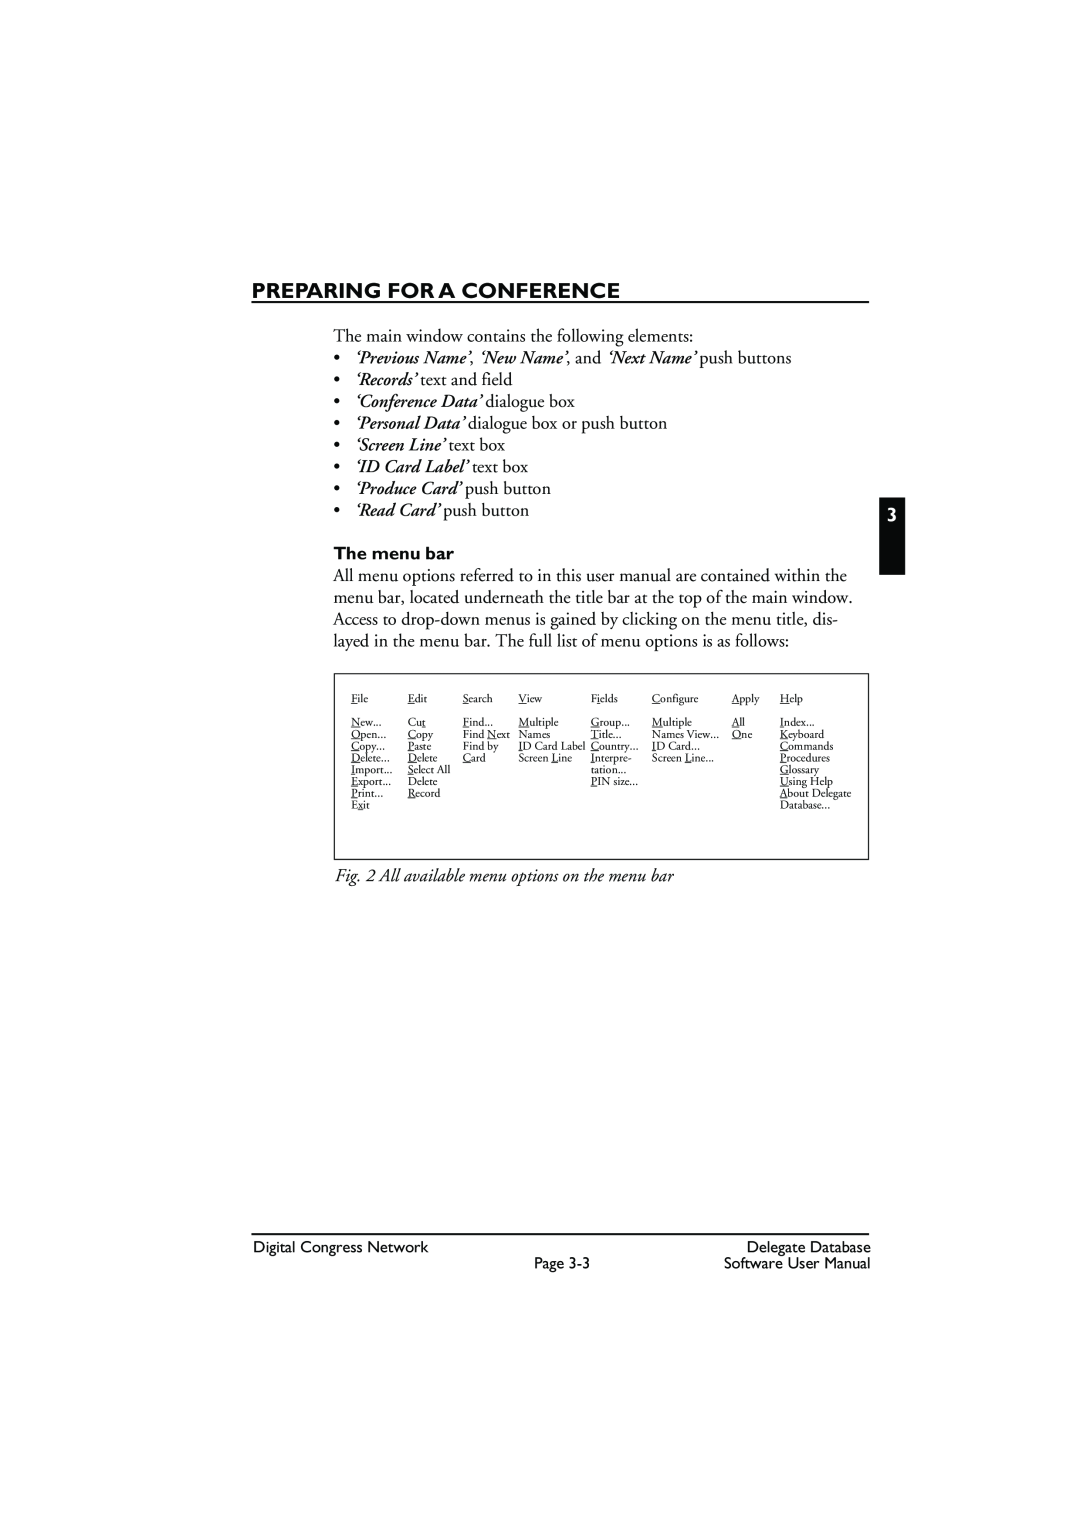 Bosch Appliances LBB3580 user manual Preparing For A Conference, ‘Conference Data’ dialogue box, ‘Produce Card’ push button 